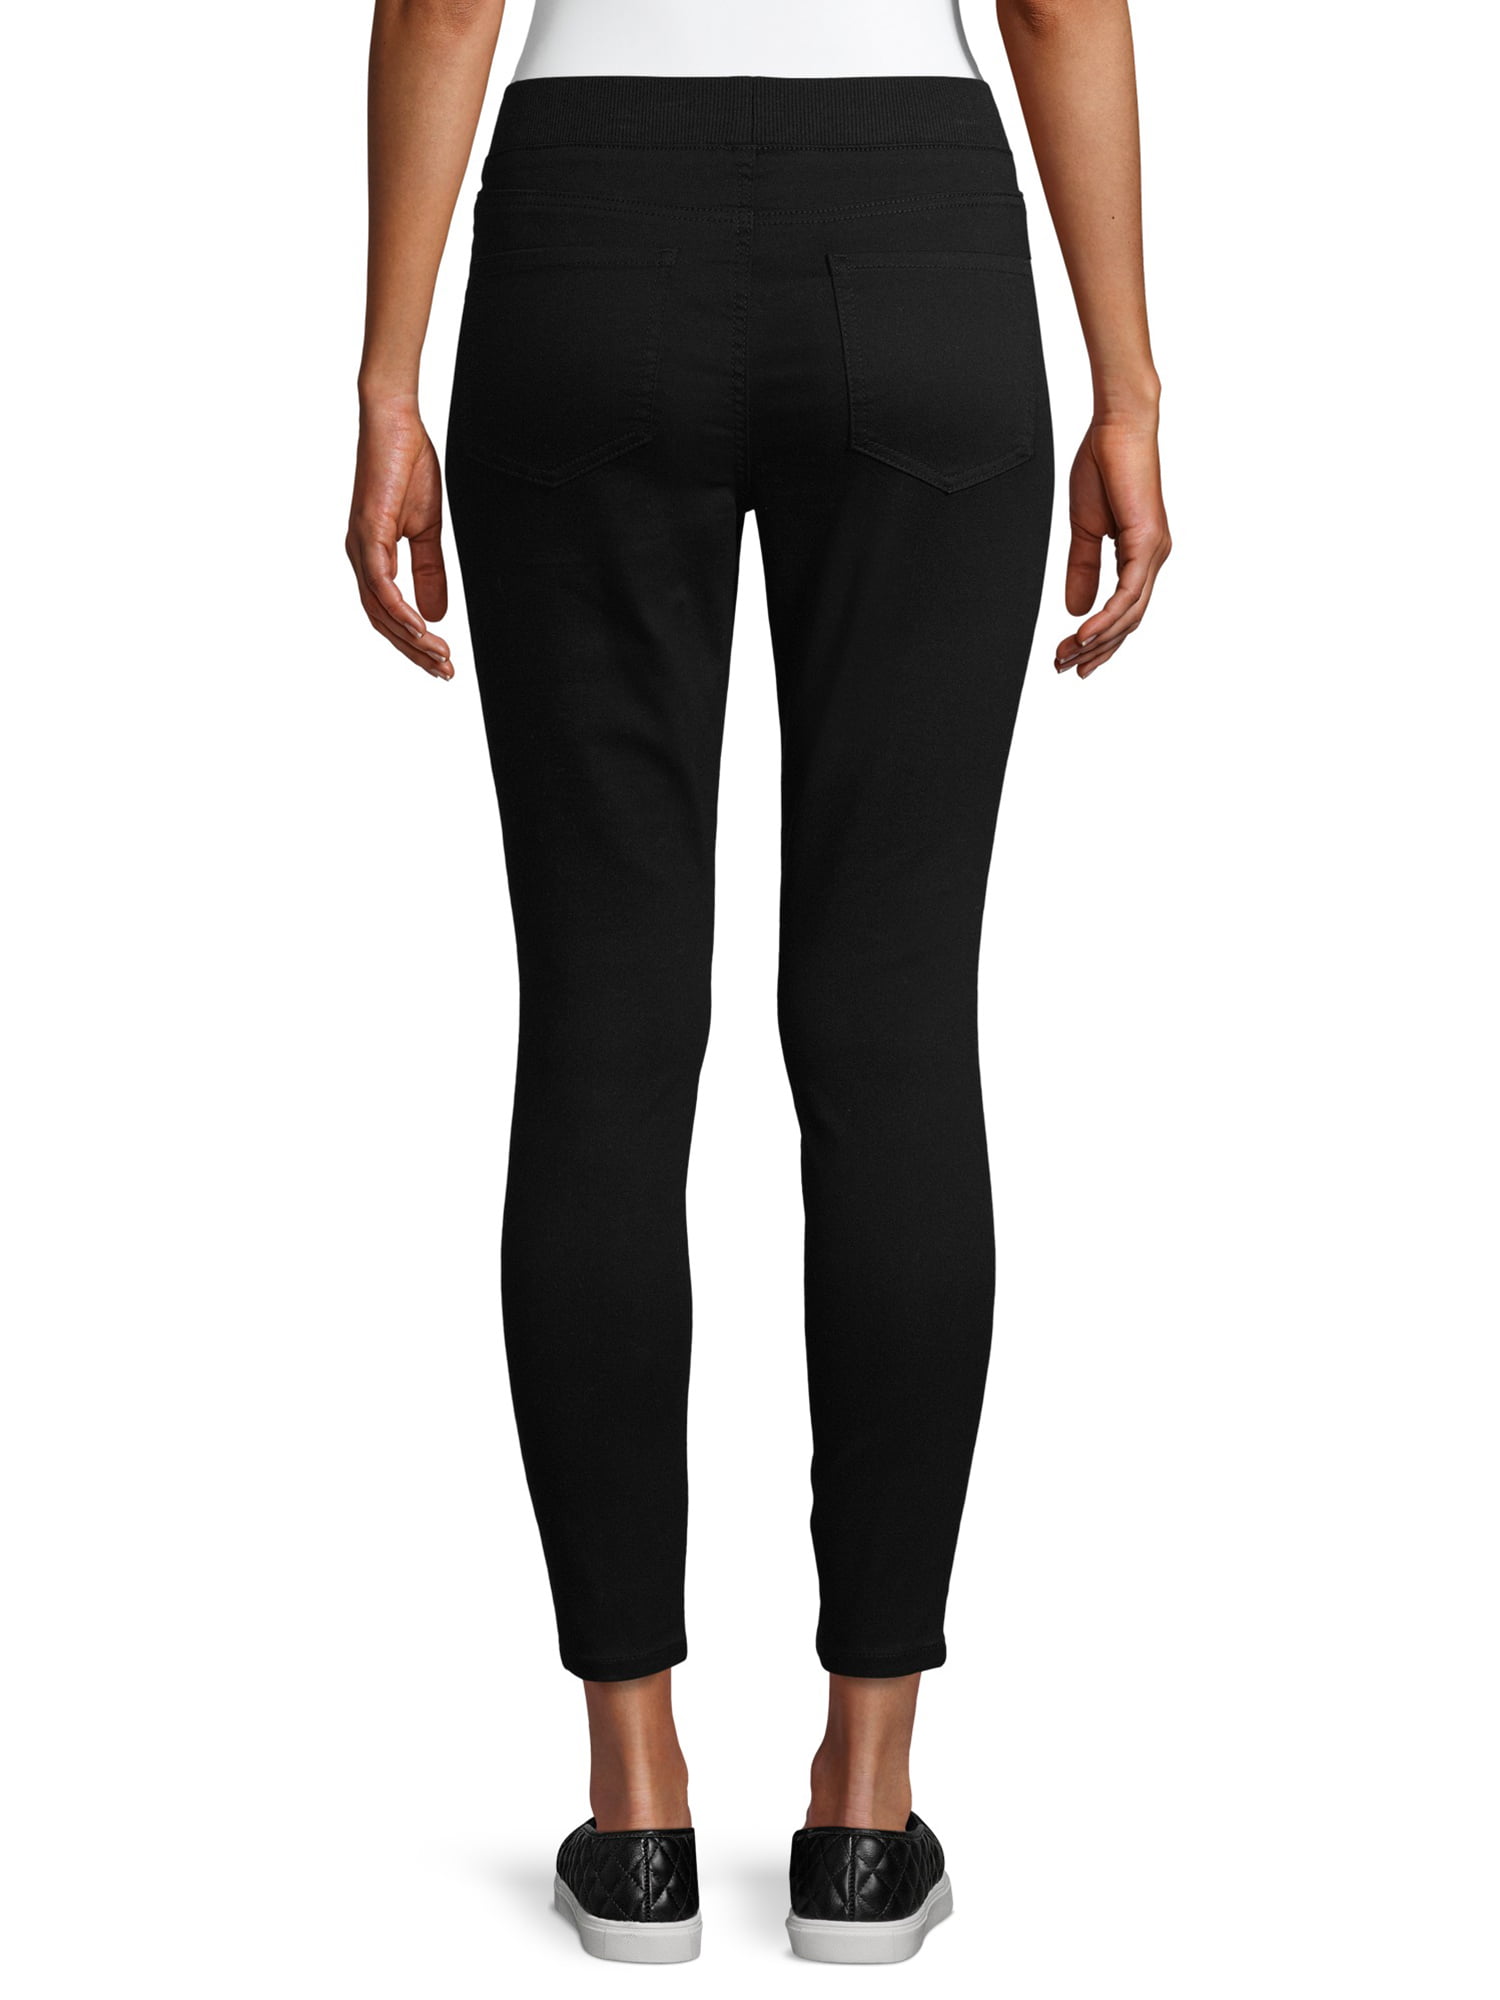 Walmart Jeggings No Boundaries, It's composed of velour knit that has a  soft hand feel, making it the perfect legging to sleep in or curl up on the  couch in.